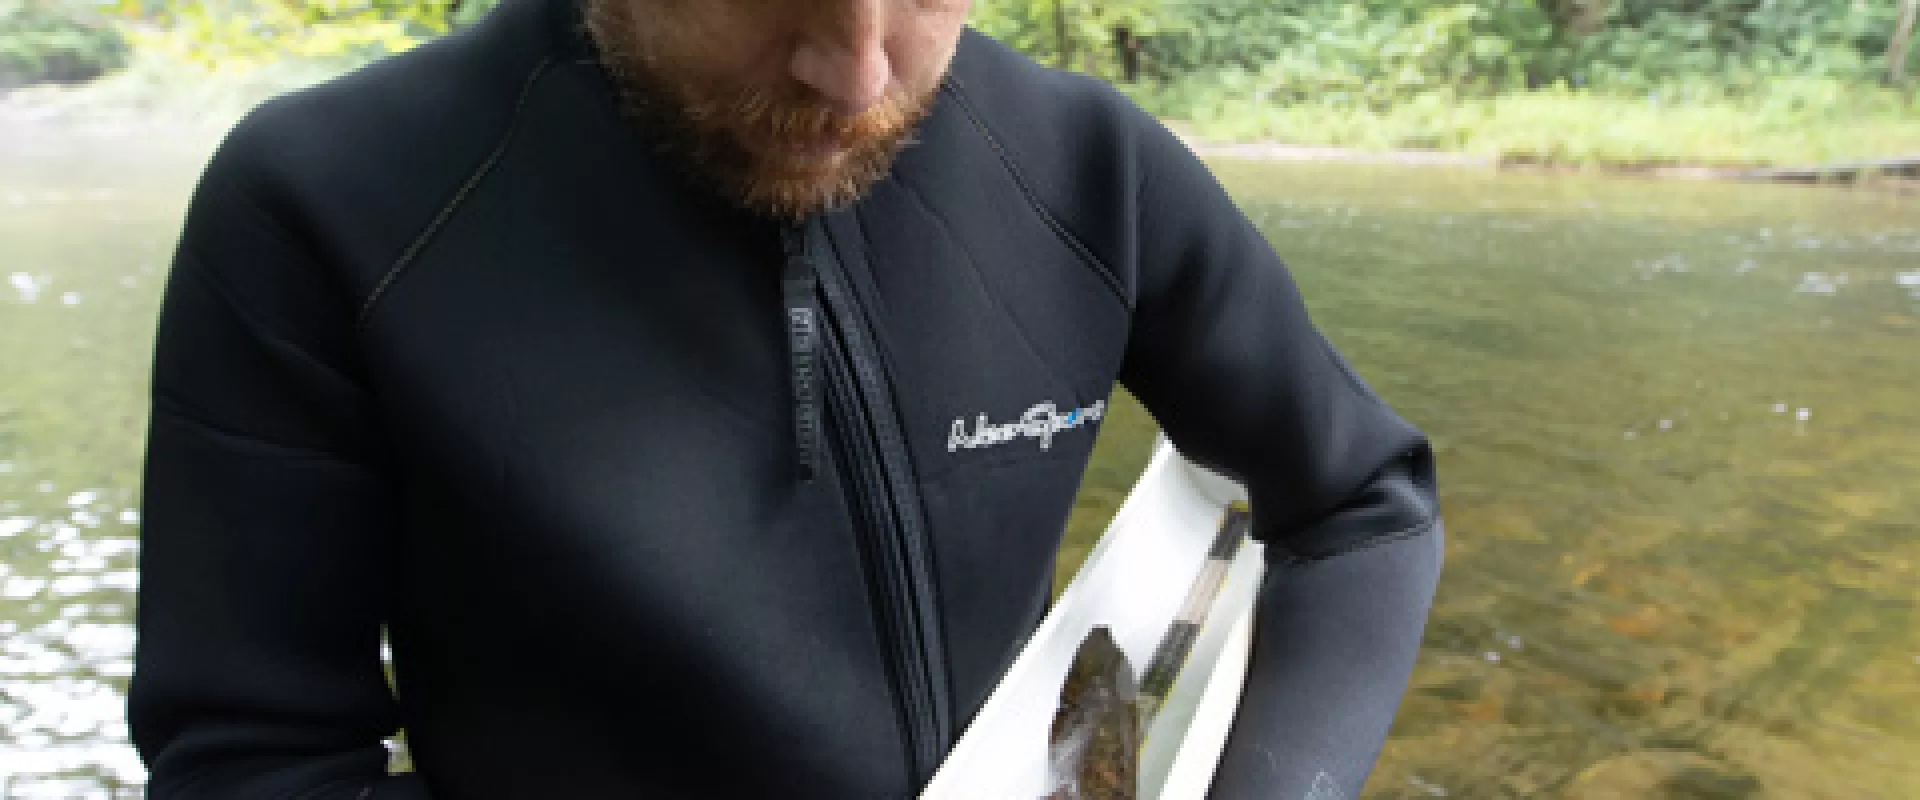 Cold-blooded Conservation: Homes for Hellbenders - If you build it, will they come?